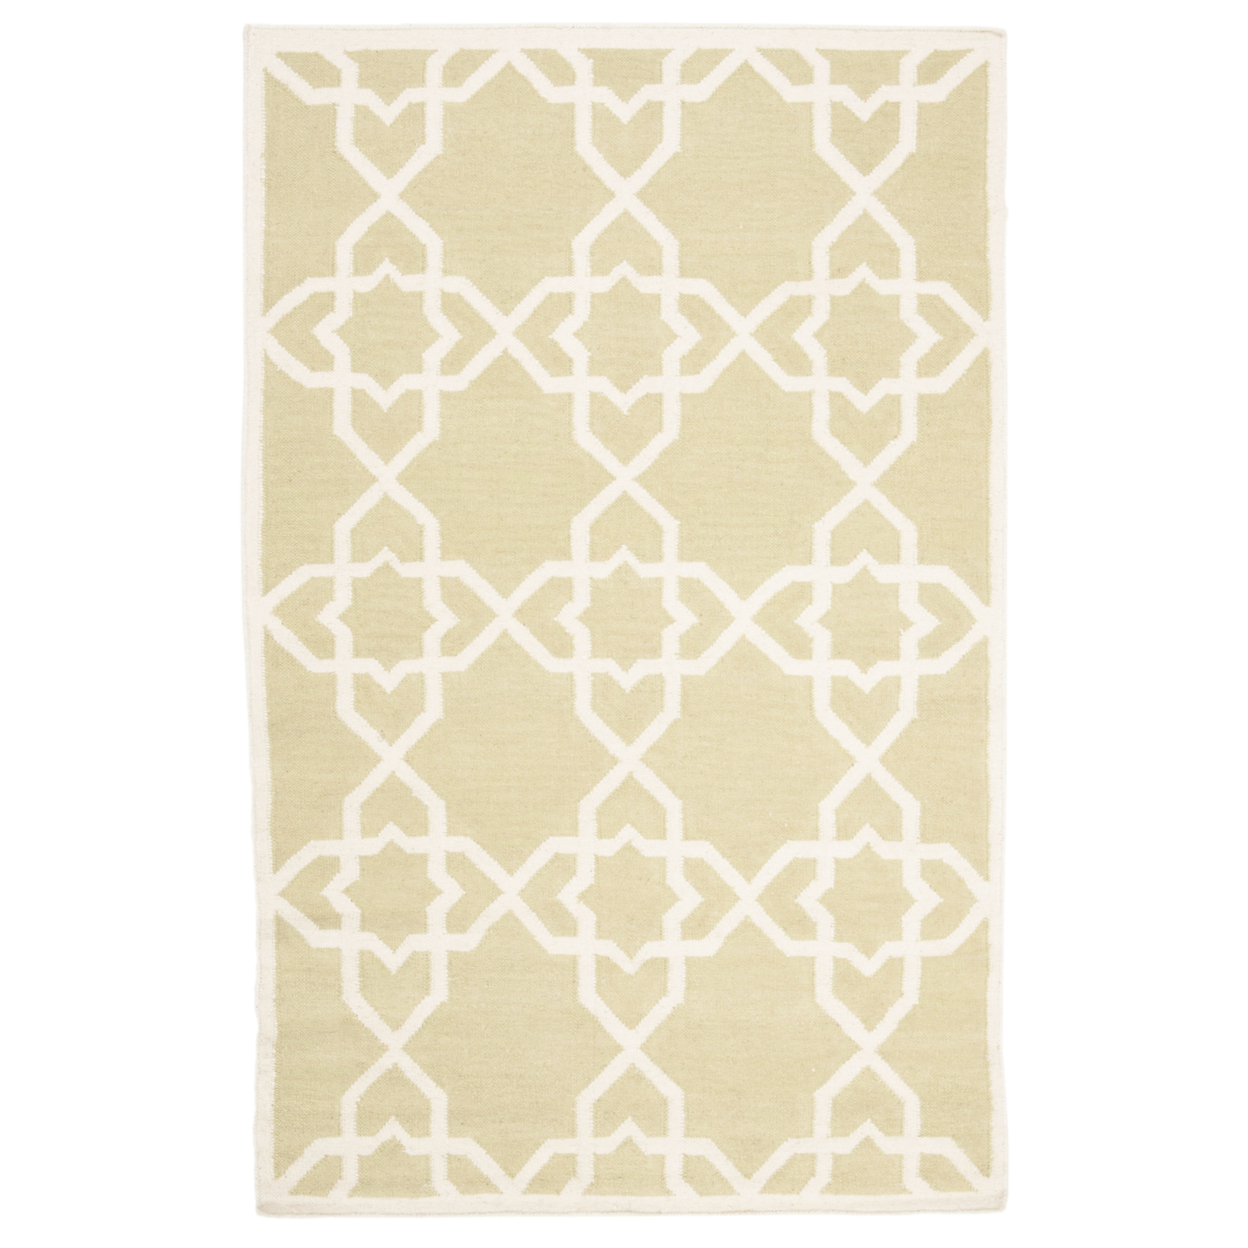 SAFAVIEH Dhurries DHU548A Handwoven Olive / Ivory Rug - 4' X 6'